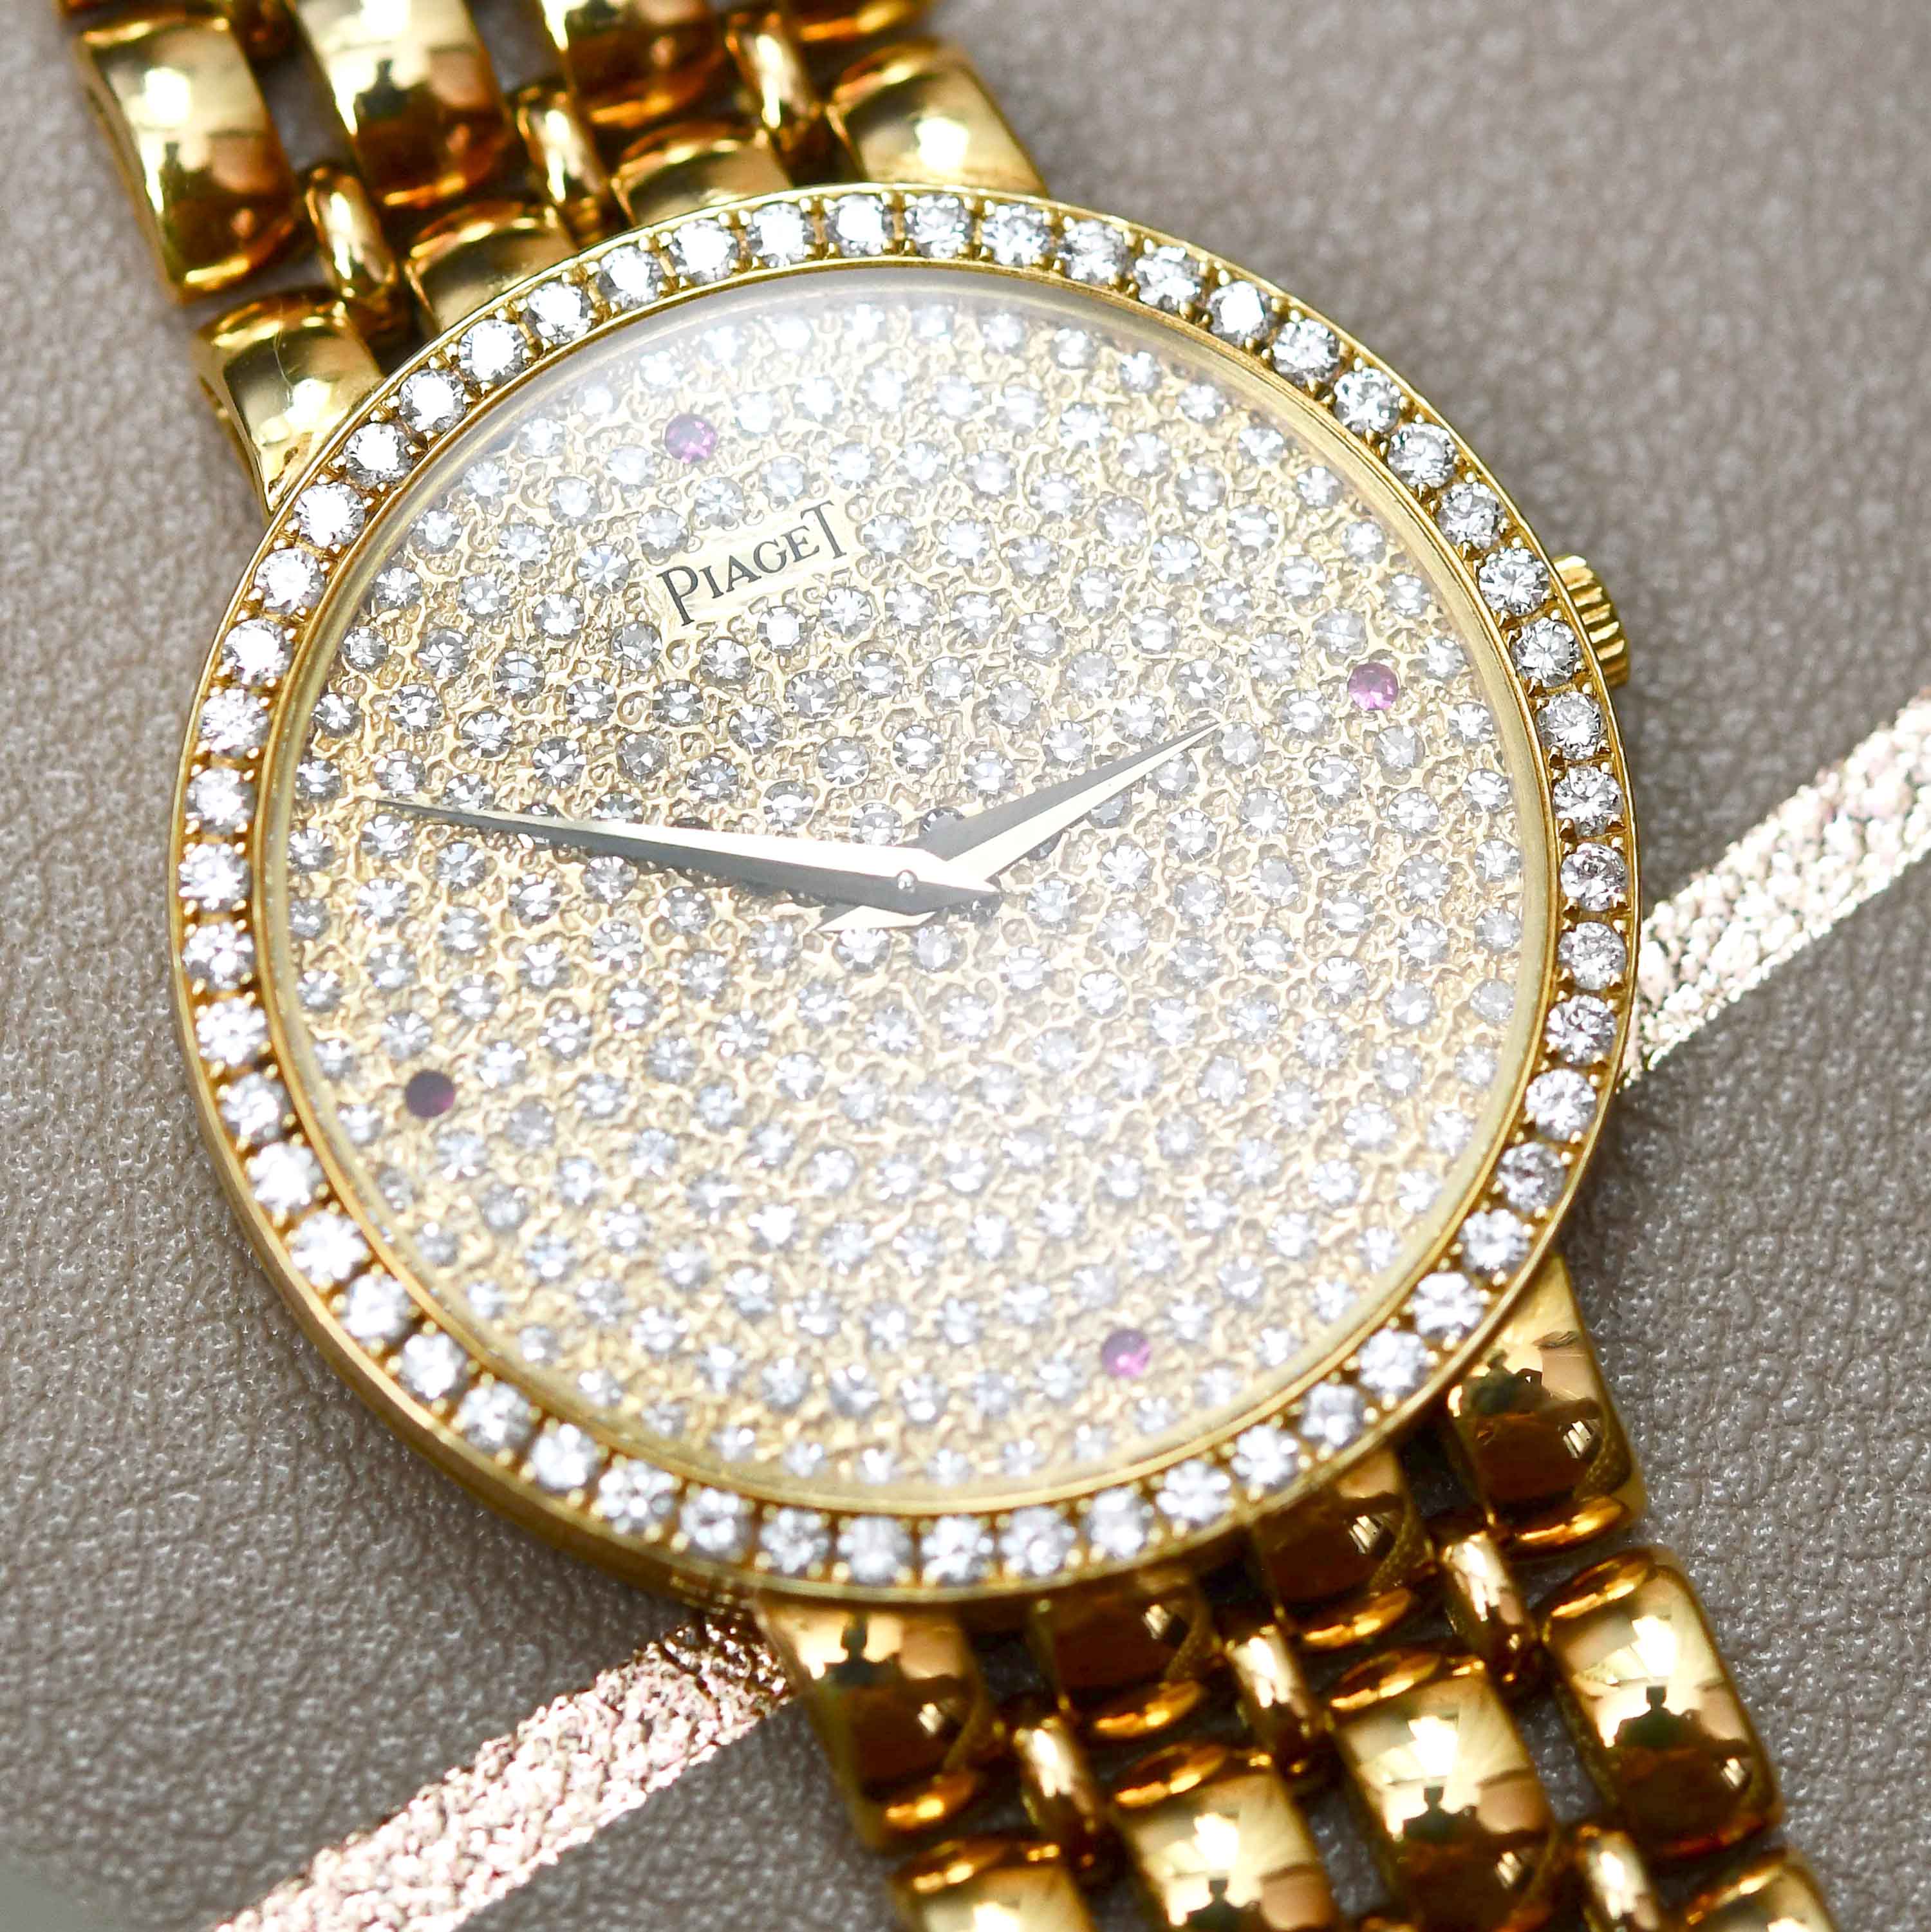 piaget-ref84075-pave-diamond-dial-ruby-indexes-yg-bracelet-img-main6